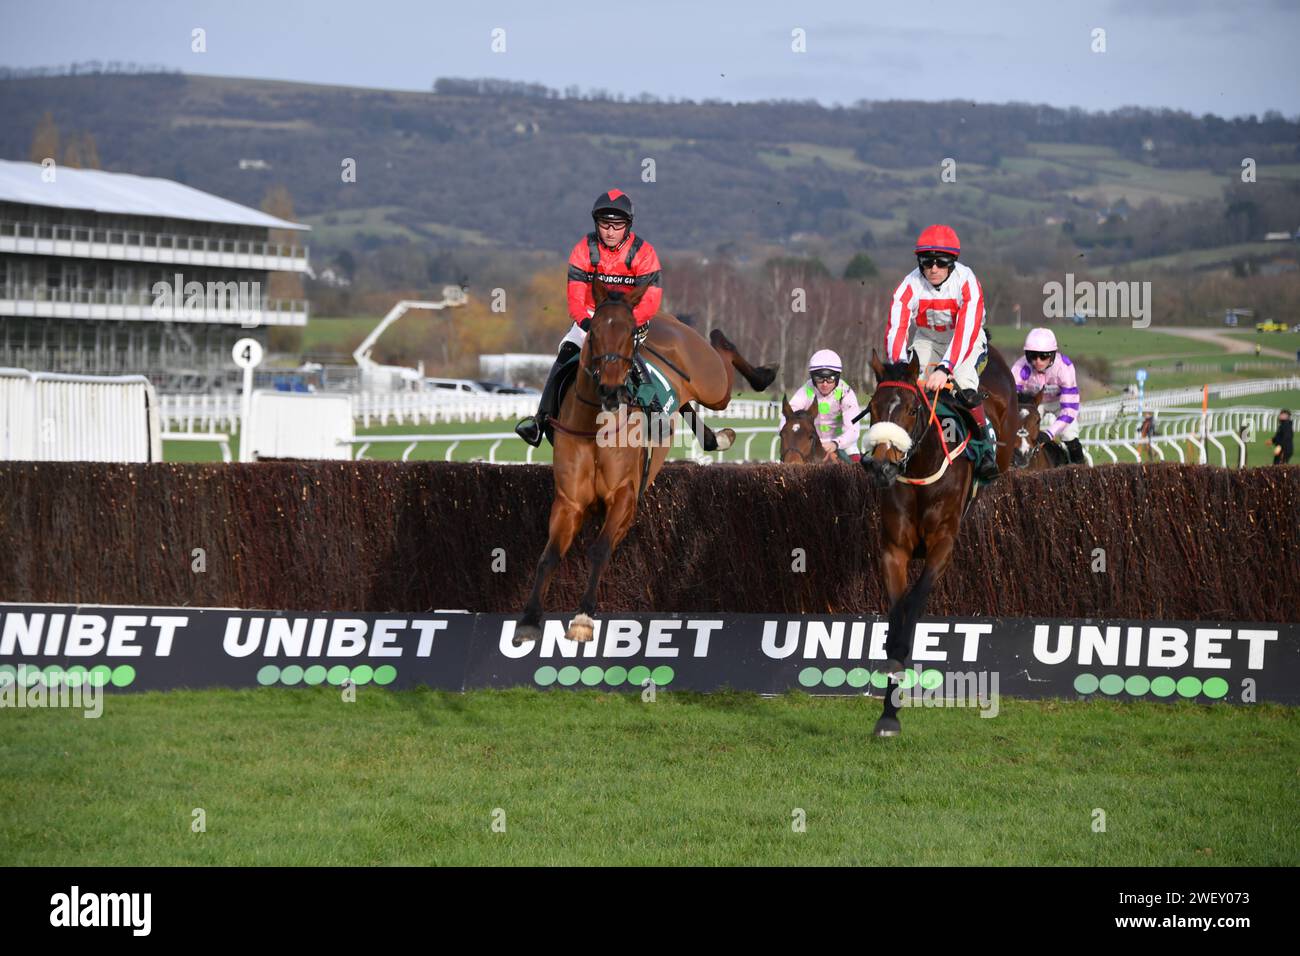 Cheltenham, UK. 27th January 2024. Cheltenham Racecource, UK. The Real Whacker lands safely in the lead. Action from the 13.50 The Paddy Power Cotswold Steeple Chase, won by Capodanno, at Cheltenham. UK. Photo Credit: Paul Blake/Alamy Sports News Stock Photo